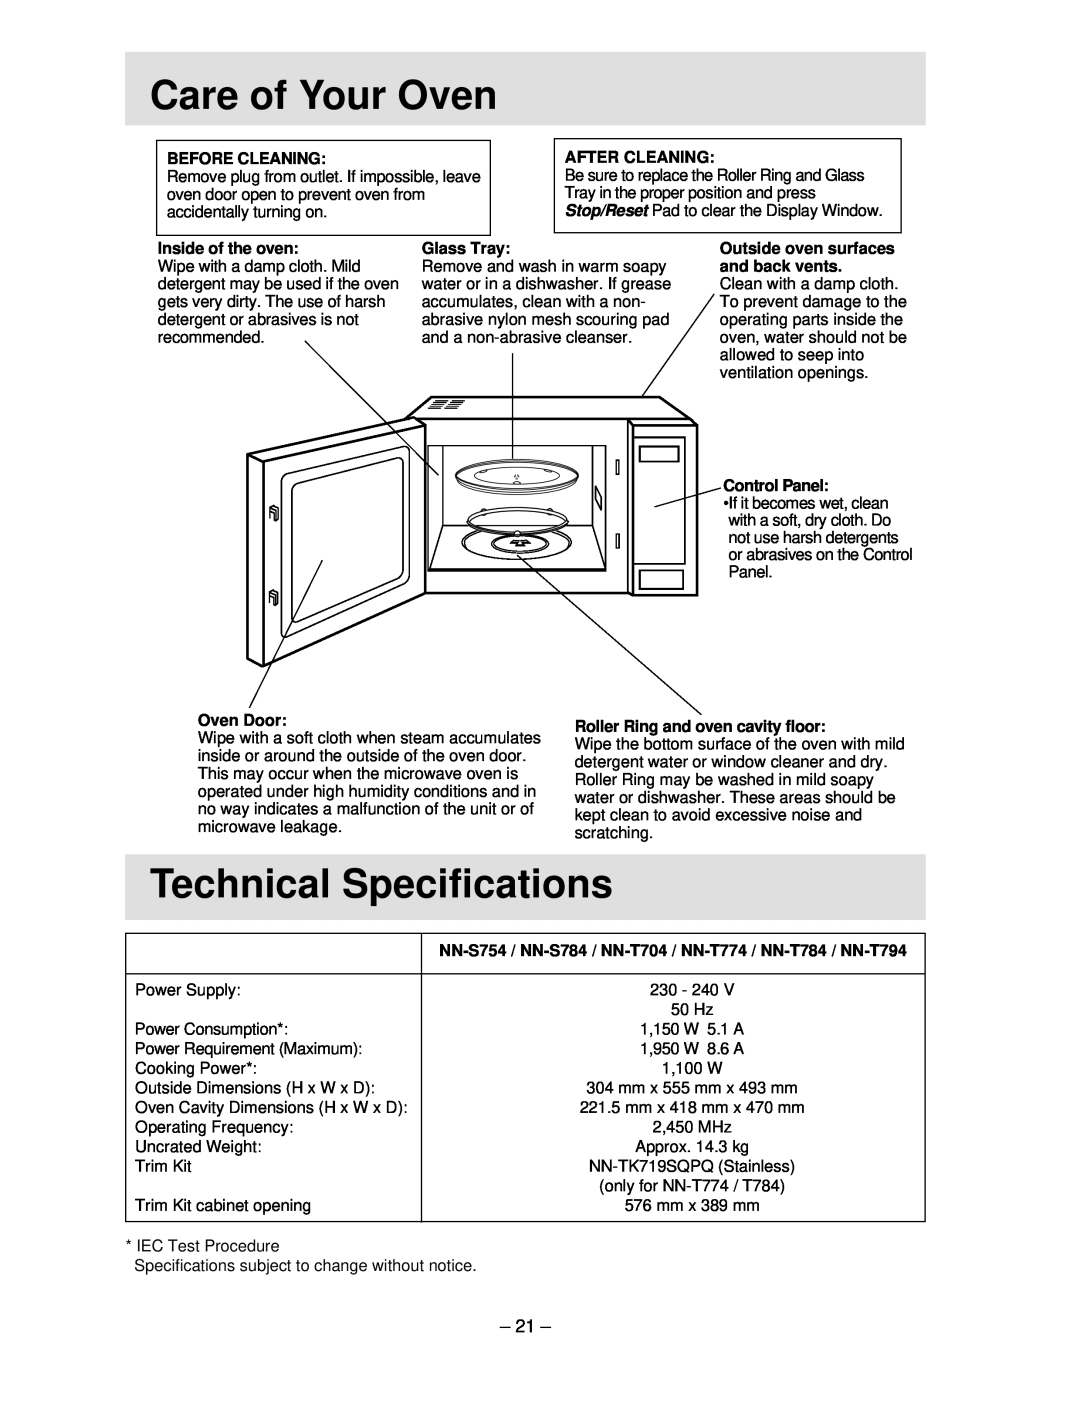 Panasonic NN-S754 manual hCarehof Your Oven, Technical Specifications 